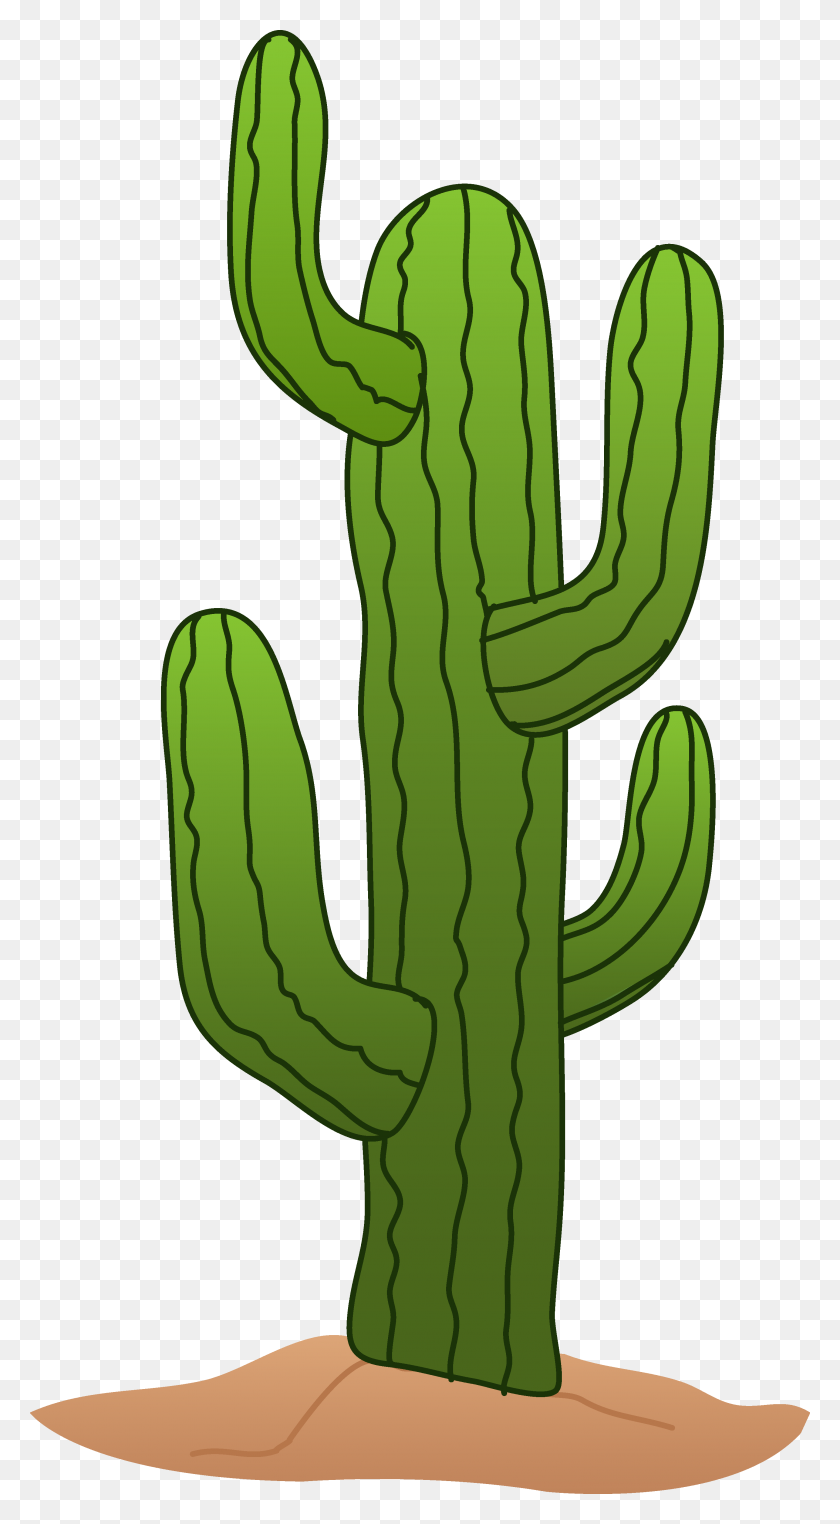 2889x5425 Animated Cactus Cliparts Free Download Clip Art Free Clip Art - Animated Valentines Clipart